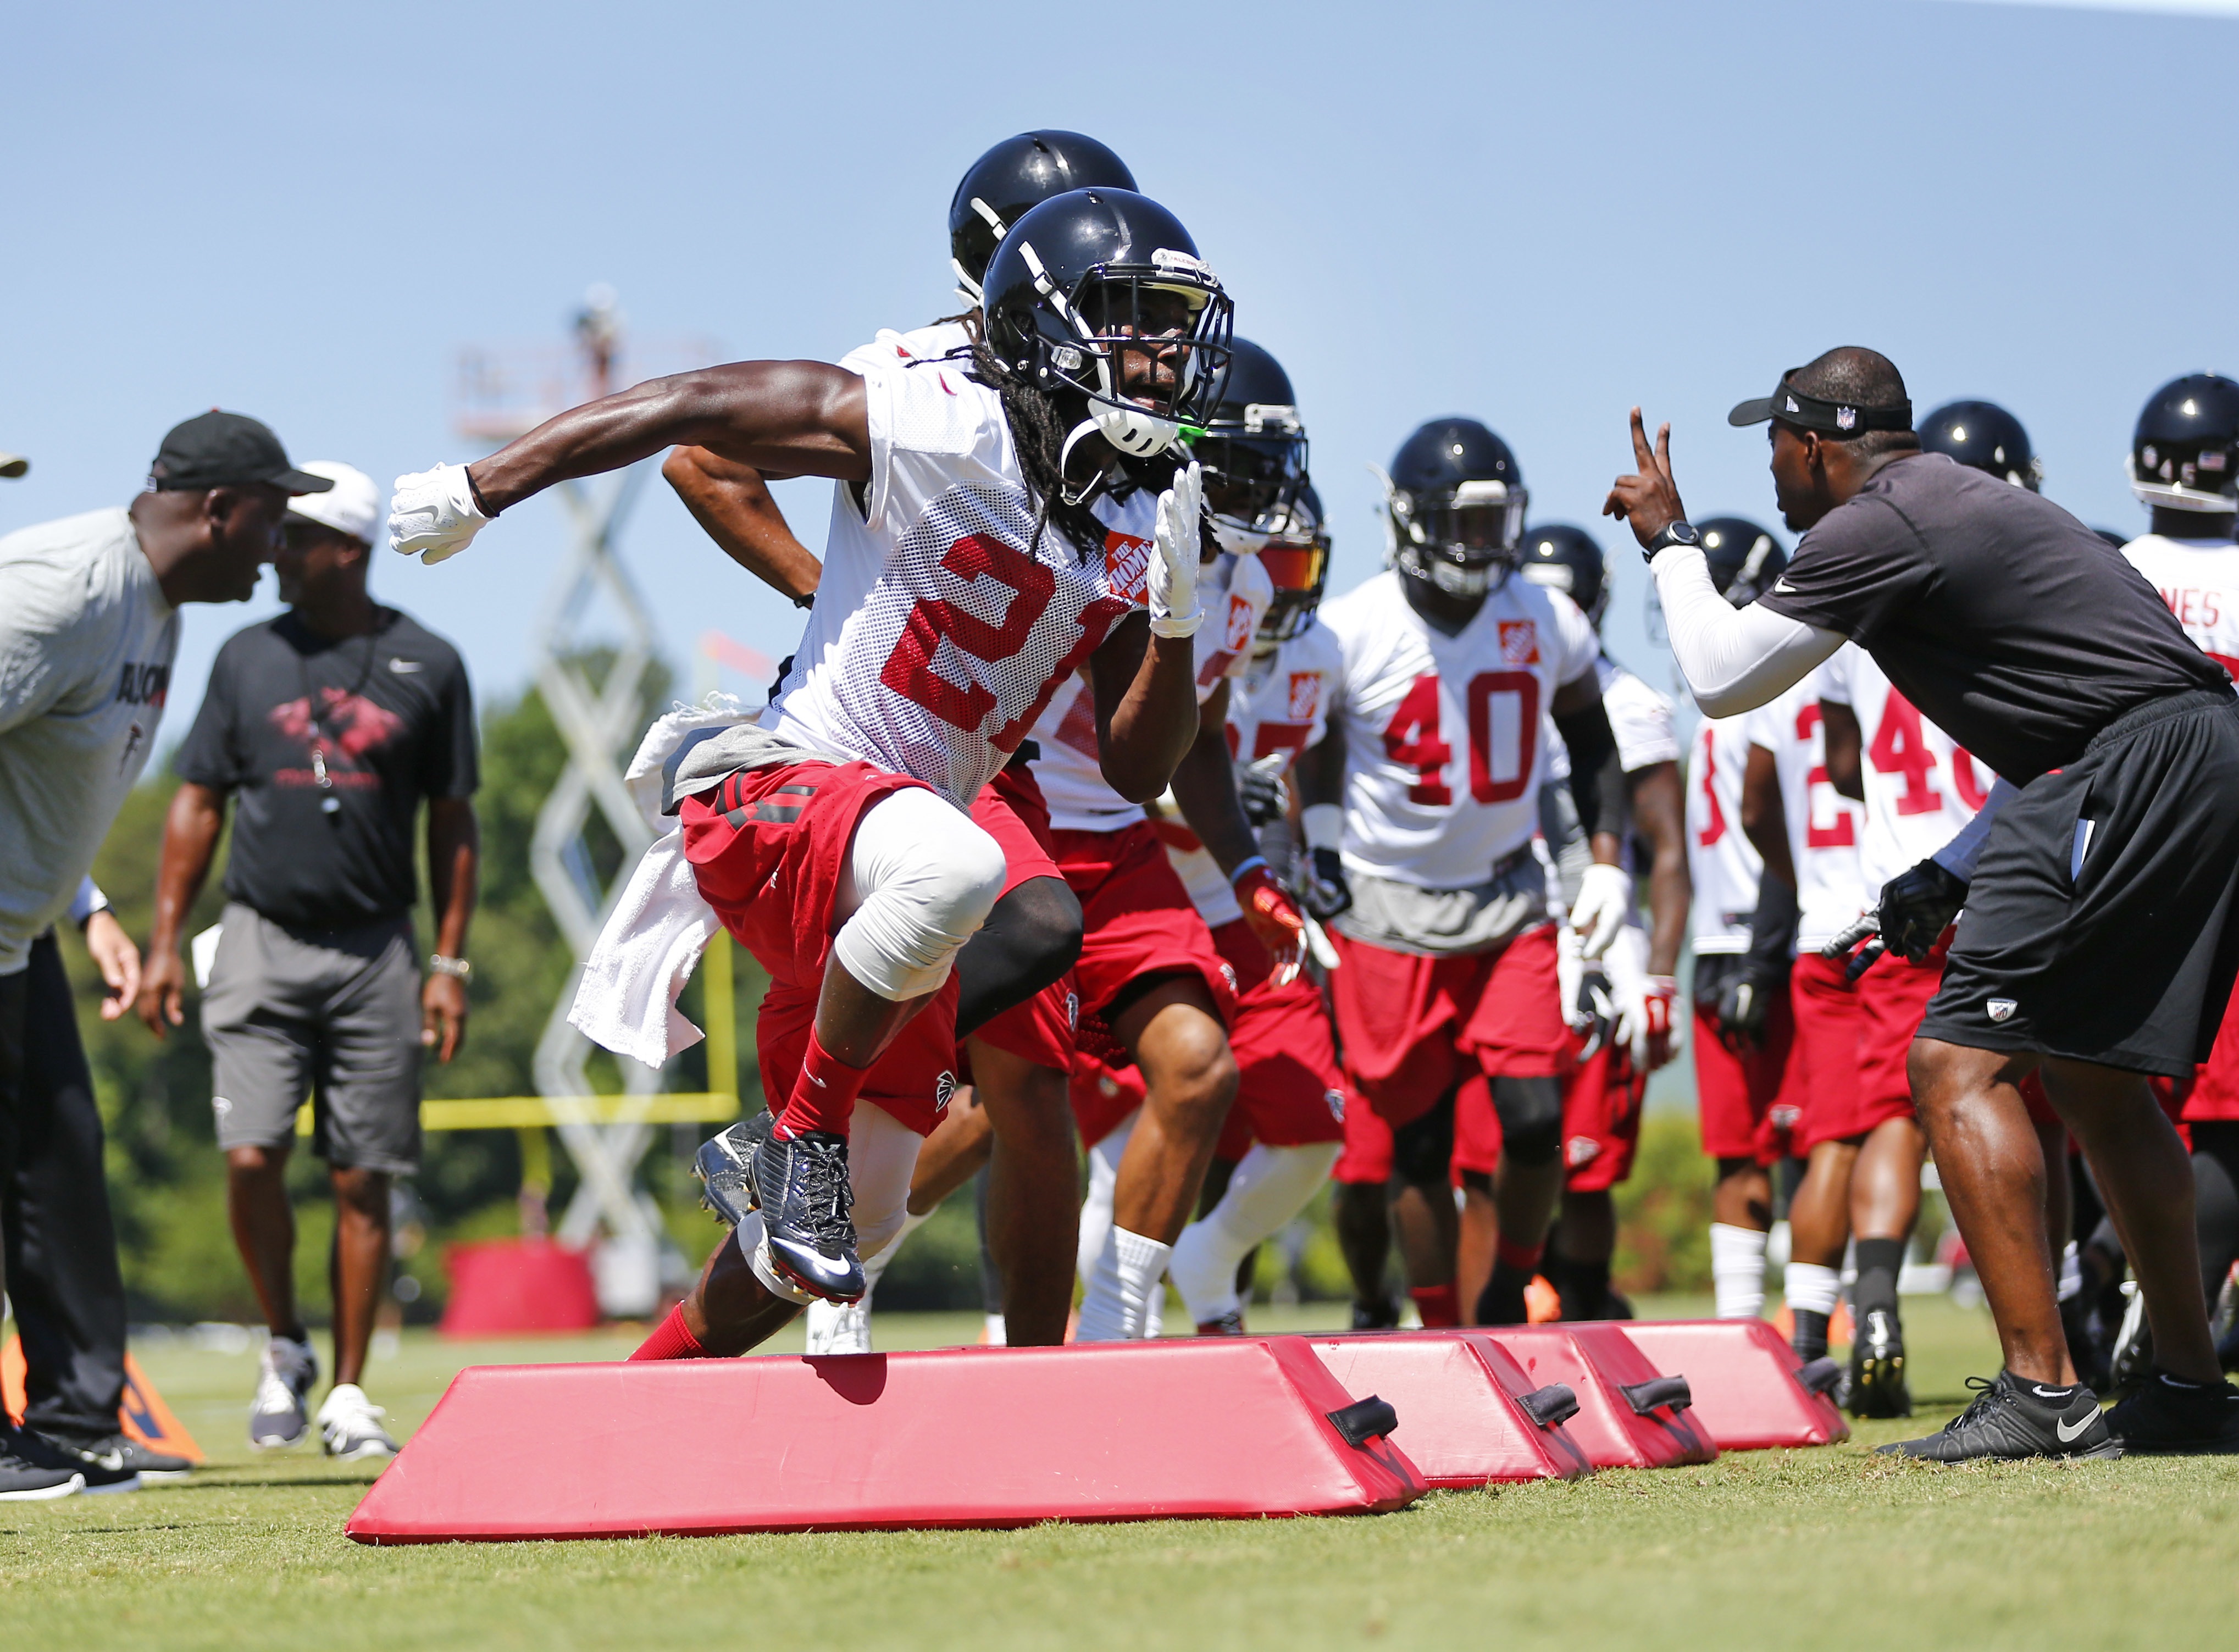 Atlanta Falcons 53-man roster arranged by position group